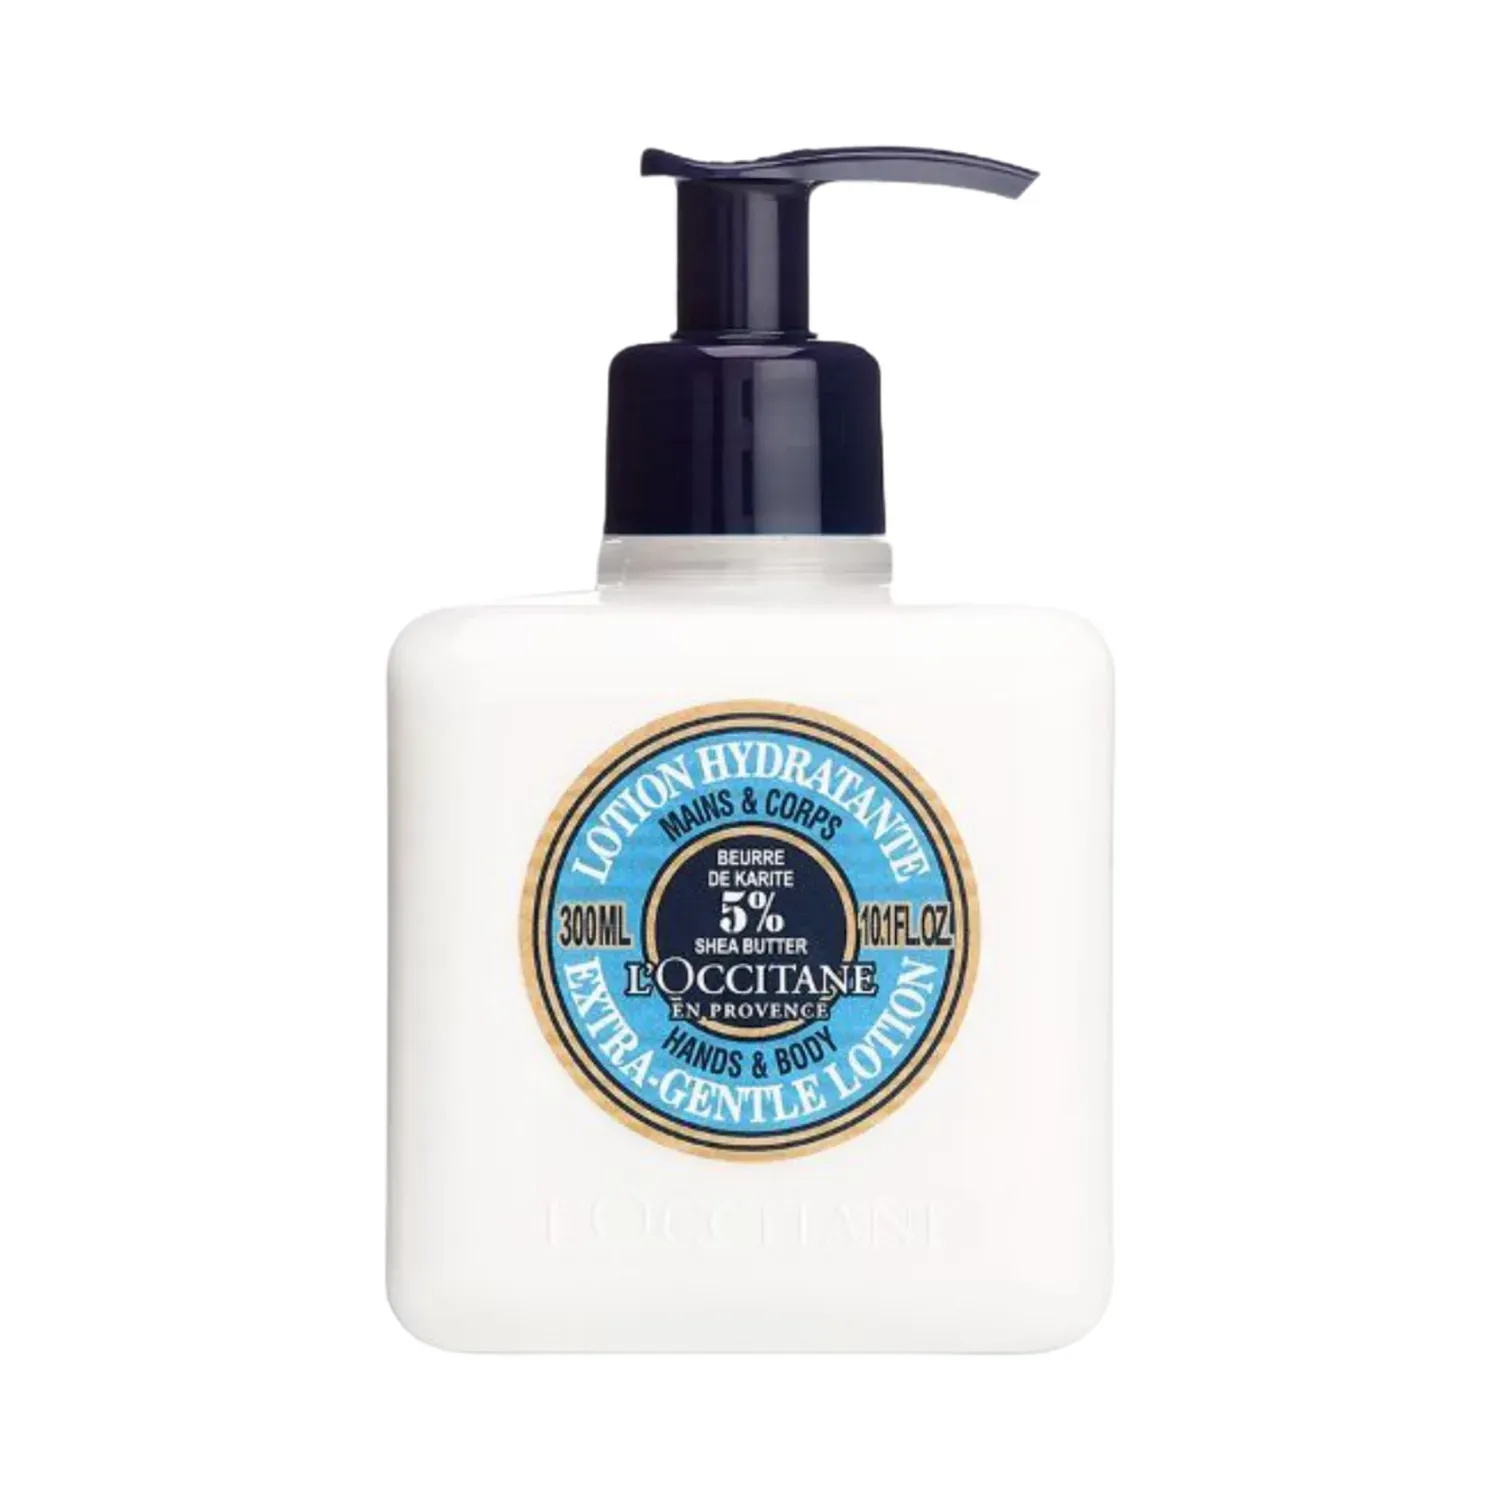 L'occitane Shea Butter Hands & Body Extra-Gentle Lotion - (300ml)